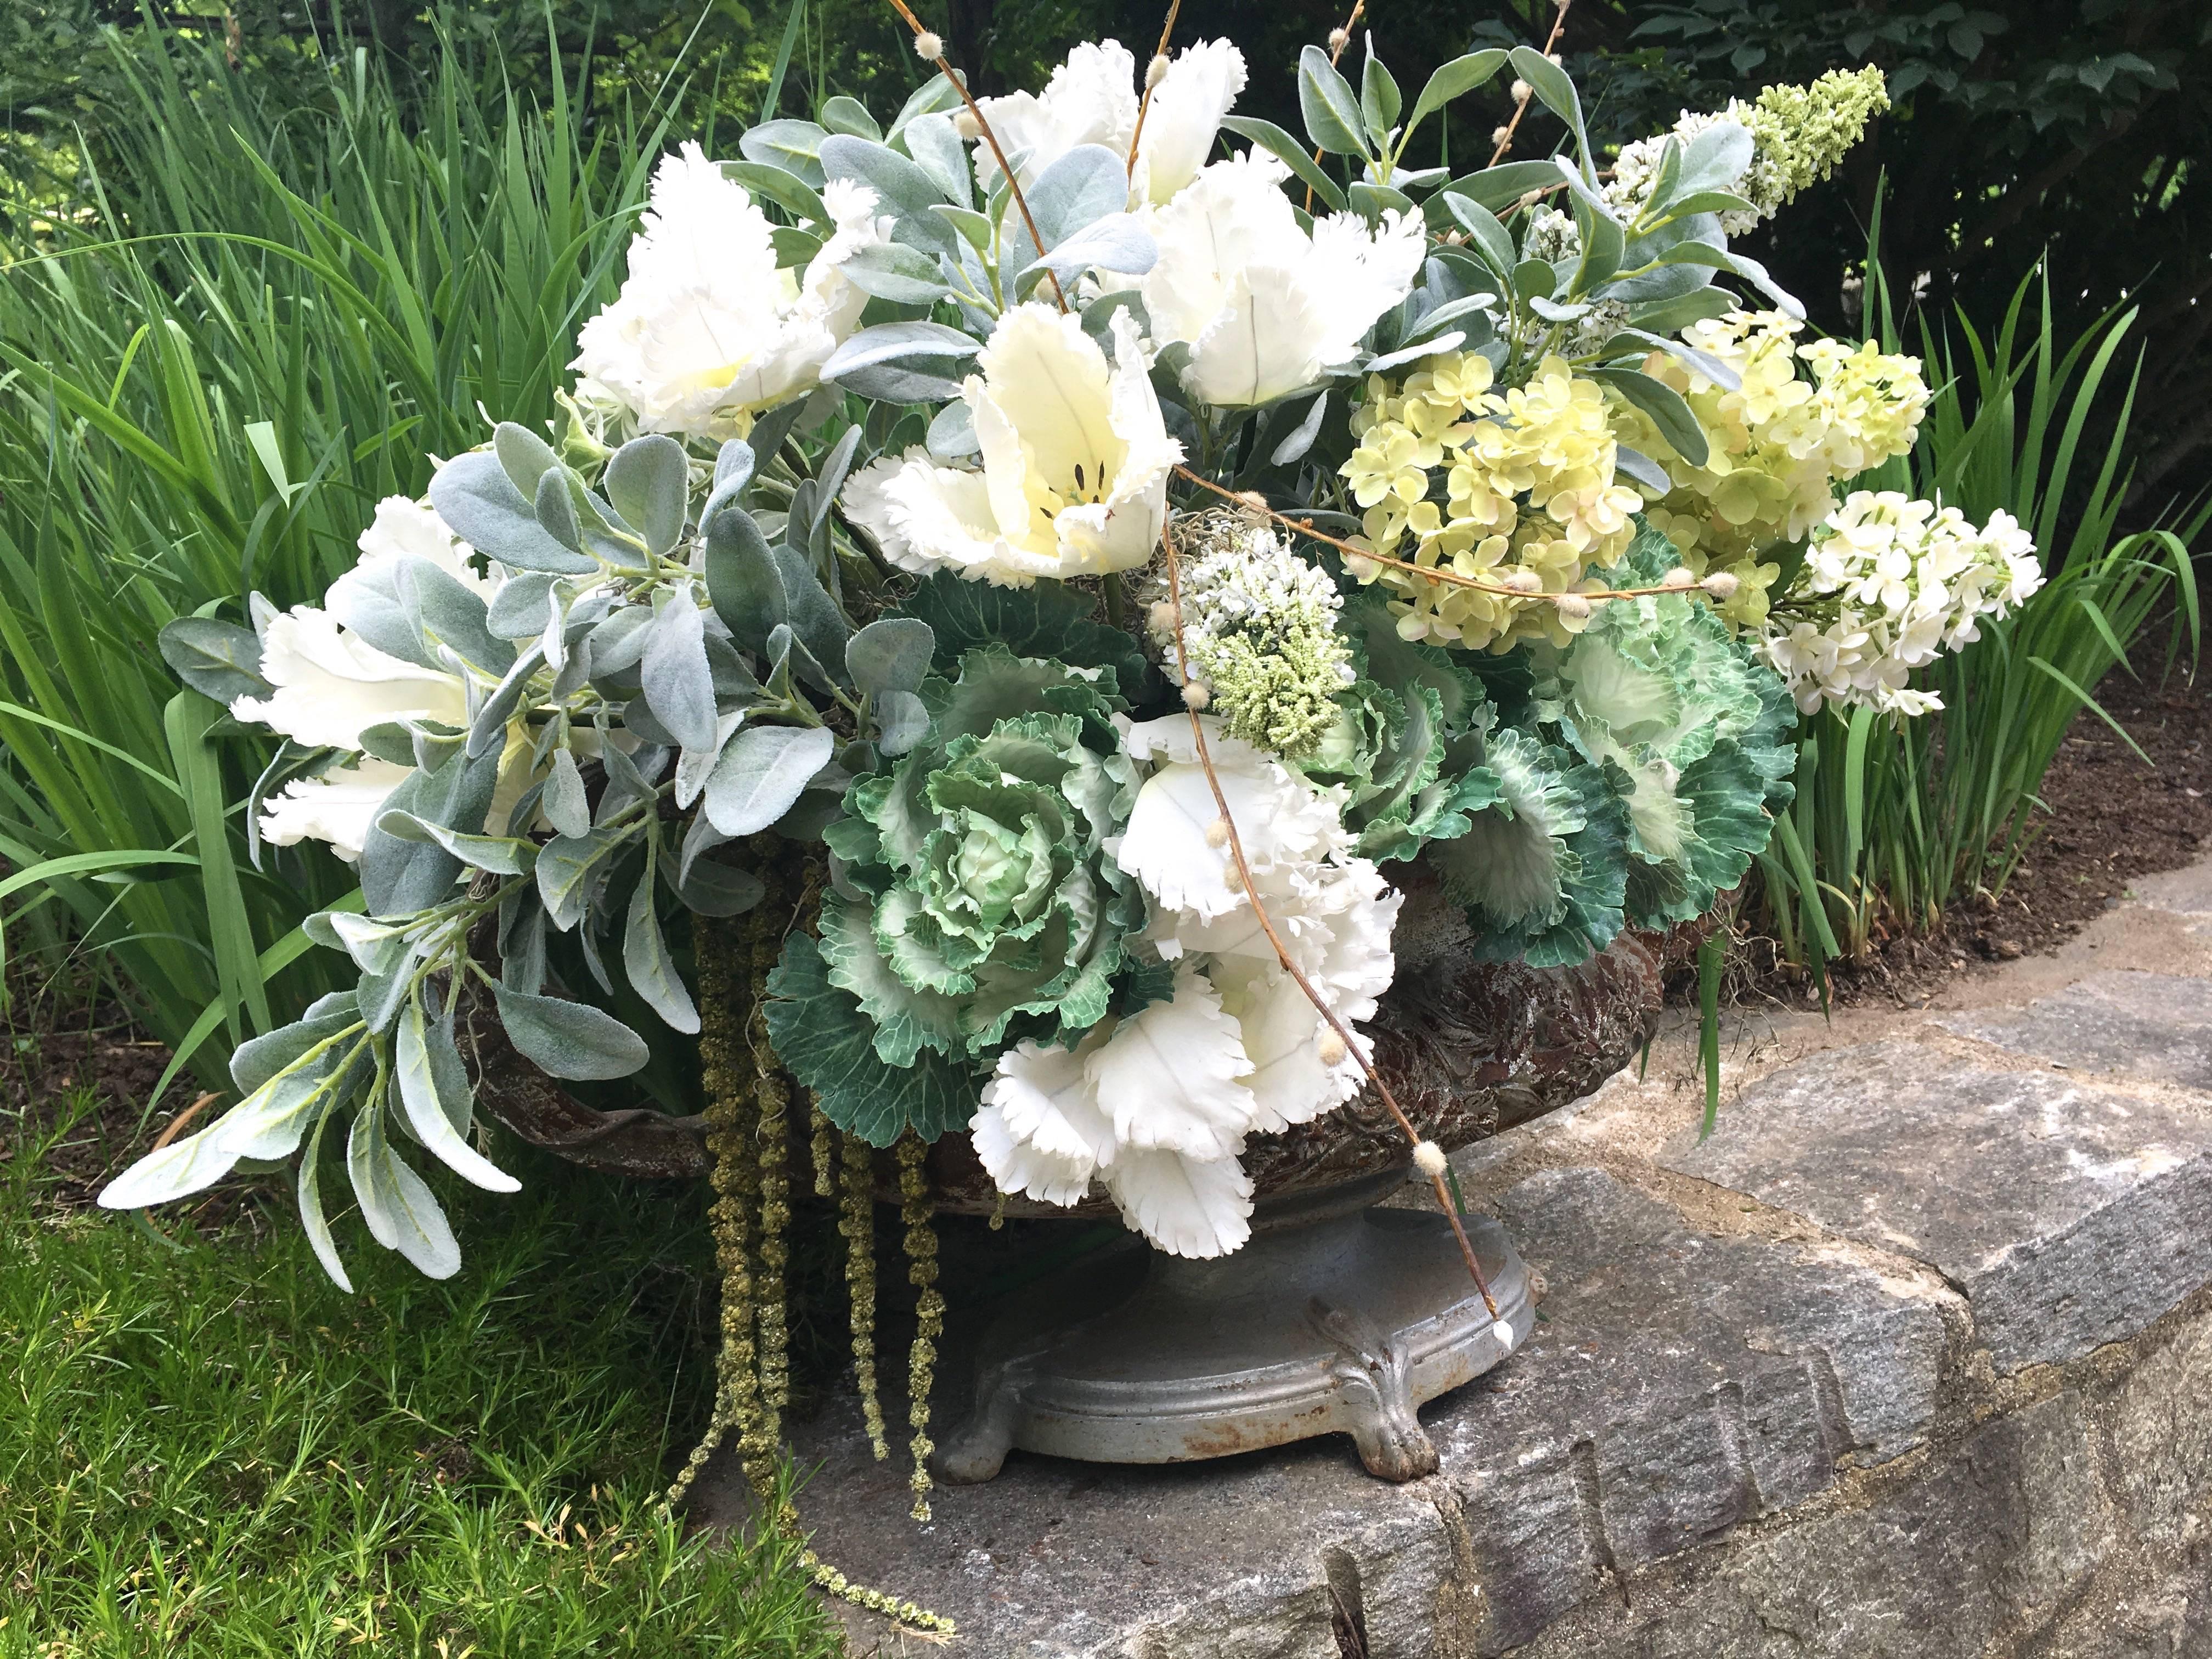 This very large tabletop cast iron urn has a lush romantic look, crisp detailed casting, oval base and highly-decorative handles in old silver paint. Filled to overflowing with fabulous faux flowers by Sari Weatherwax in shades of grey, green and